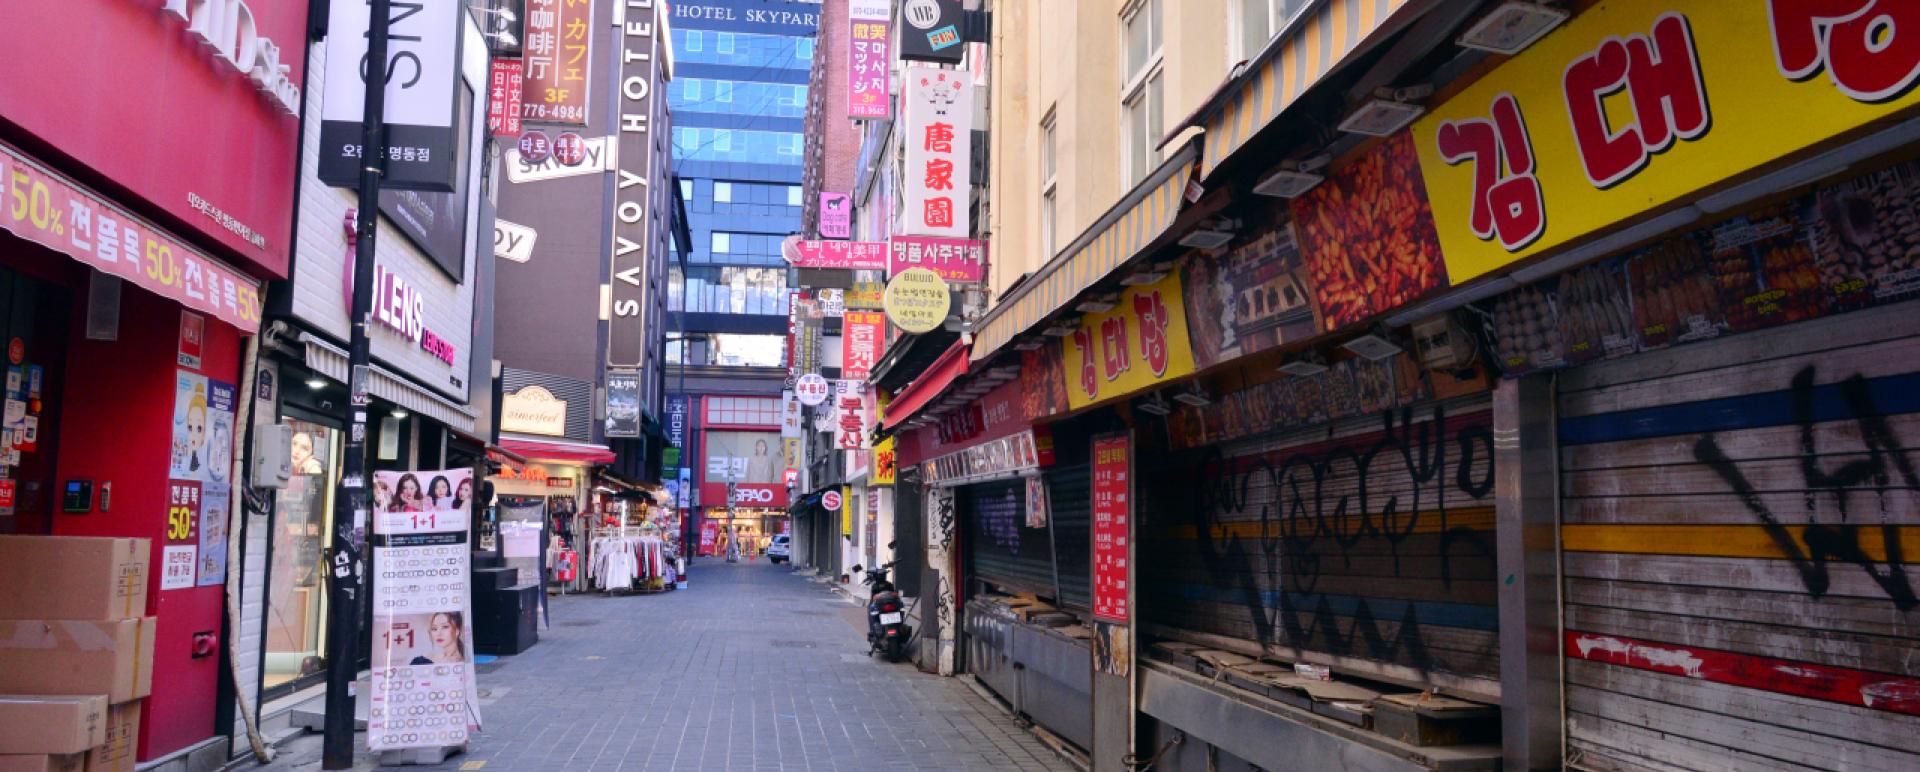 Many shops are closed with few shoppers walking around in Myeong-dong on Jan. 6. (Park Hyun-koo/The Korea Herald)